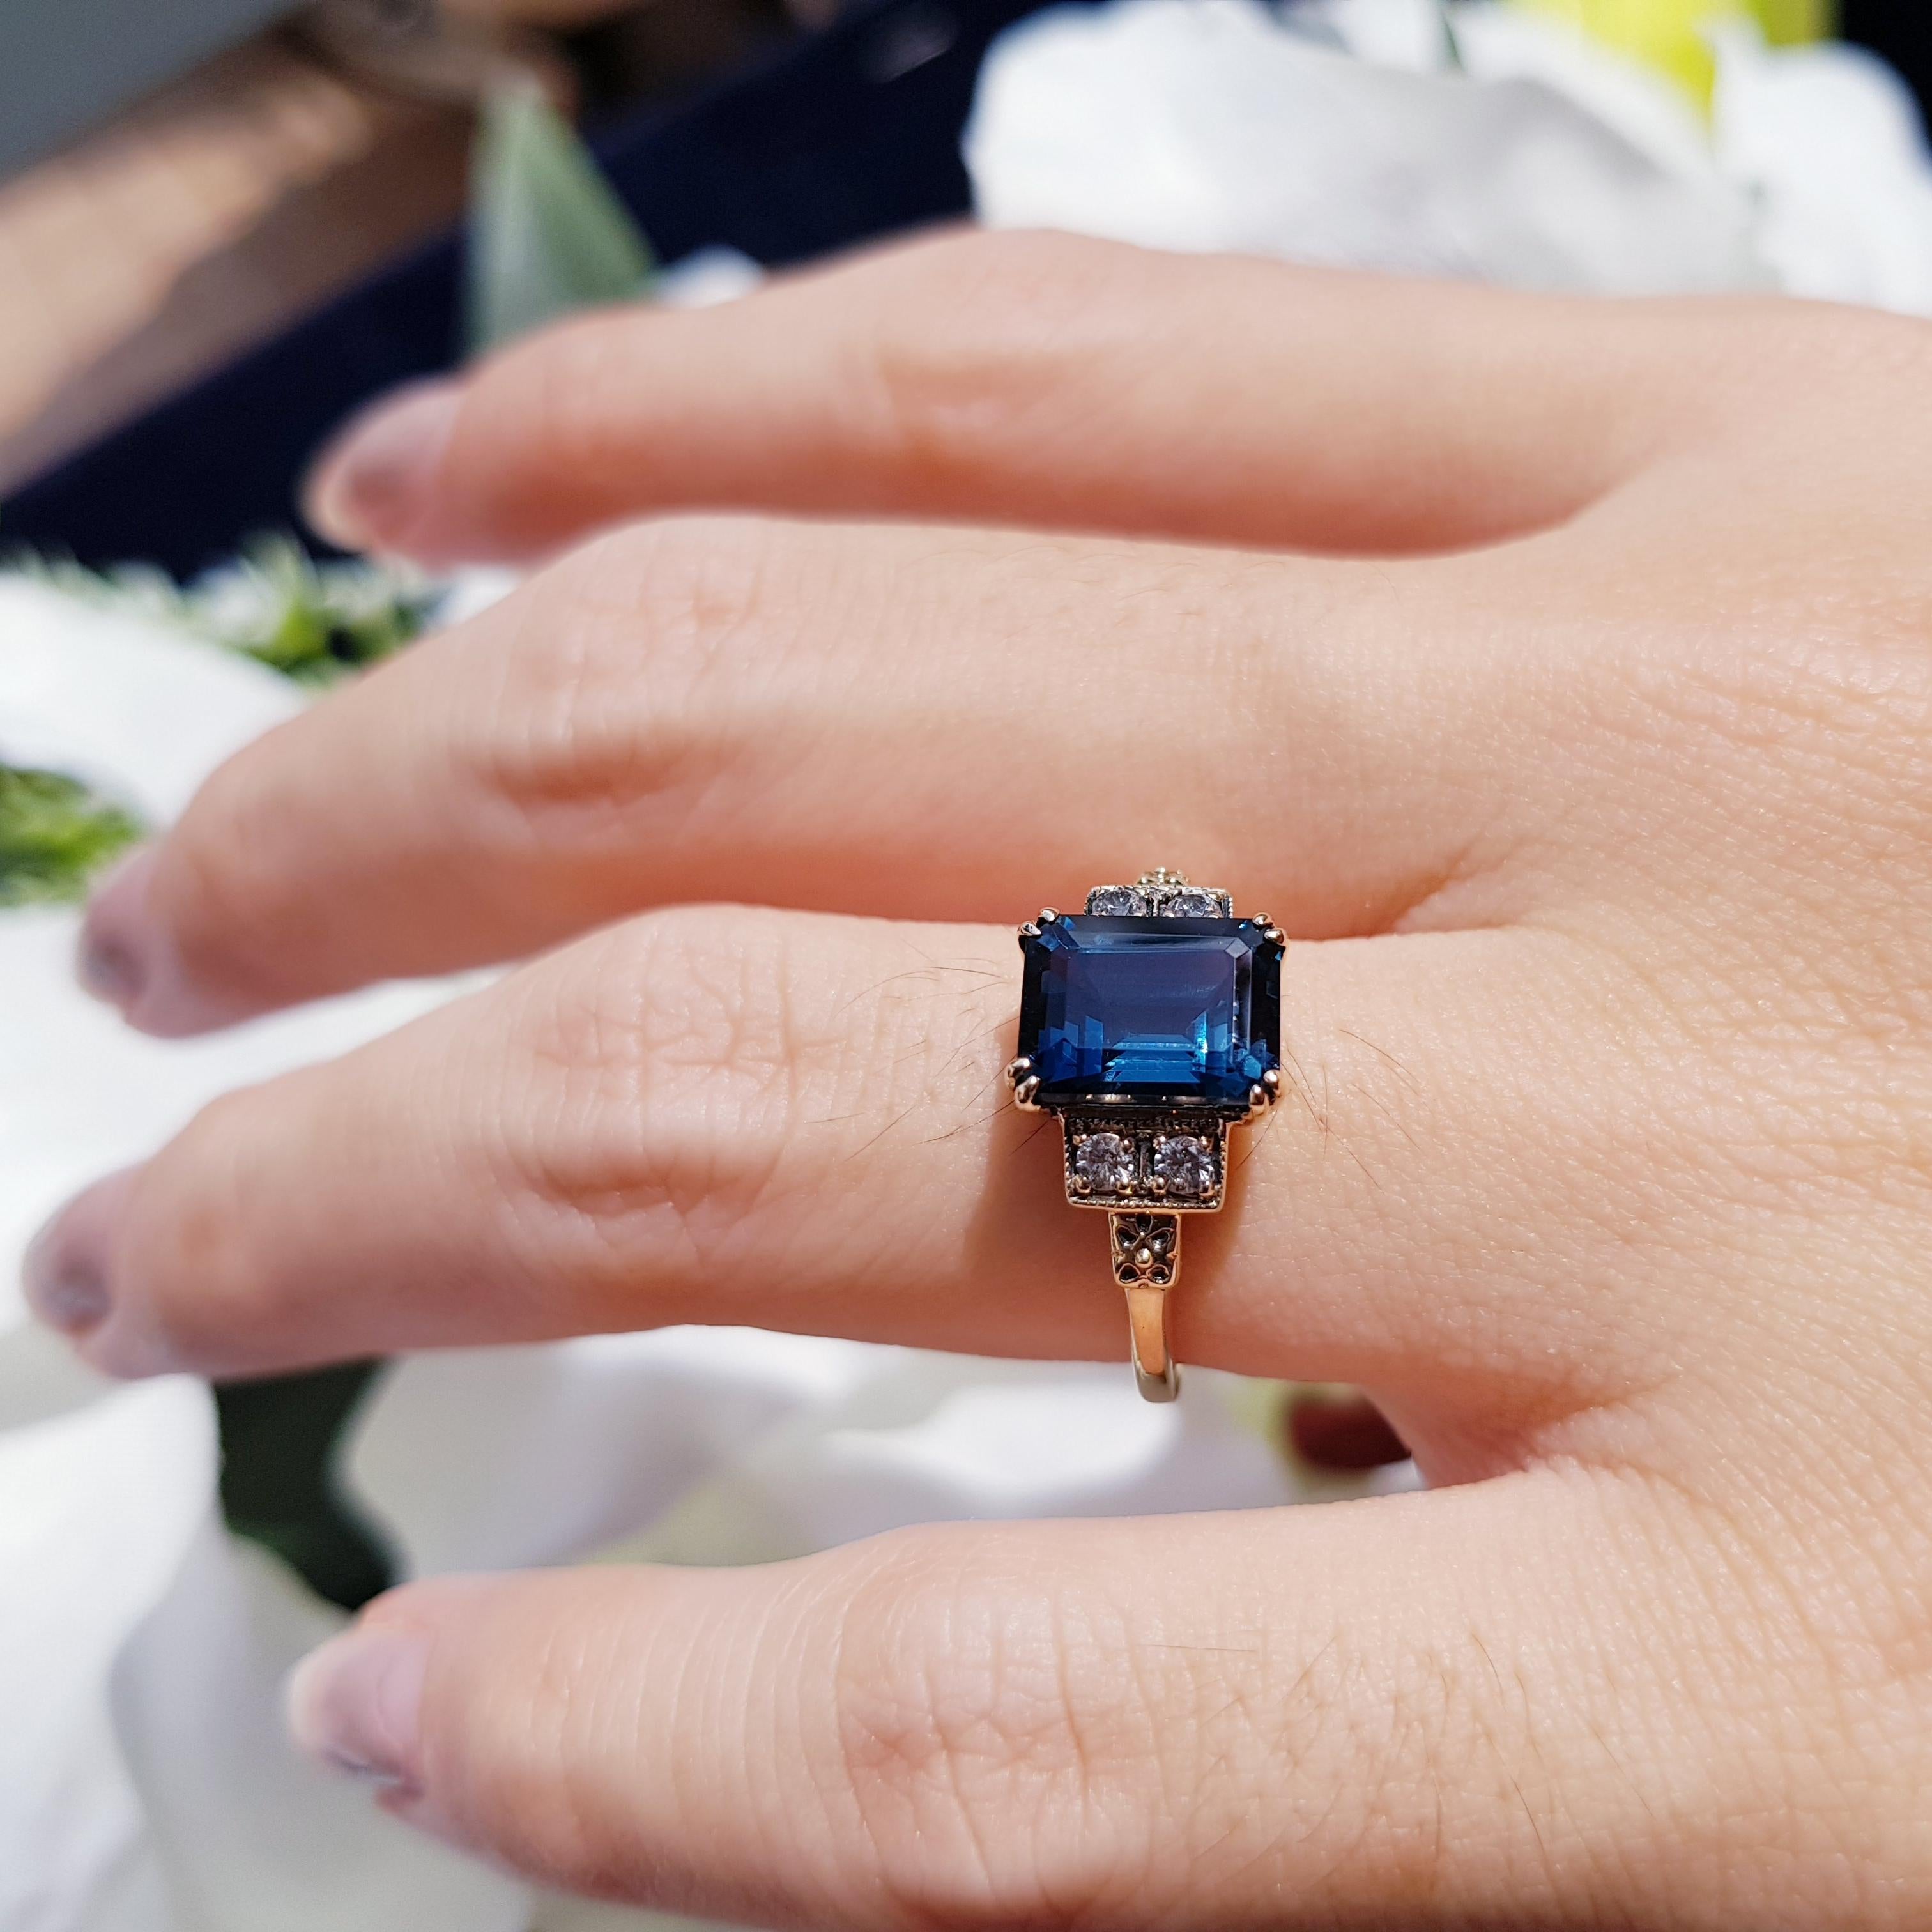 Elegantly refined, this gemstone and diamond ring showcases an emerald cut London blue topaz  complemented by four matching round white sapphires and set in enduring yellow gold.  

Ring Information
Style: Art Deco
Metal: 9K Yellow Gold 
Weight: